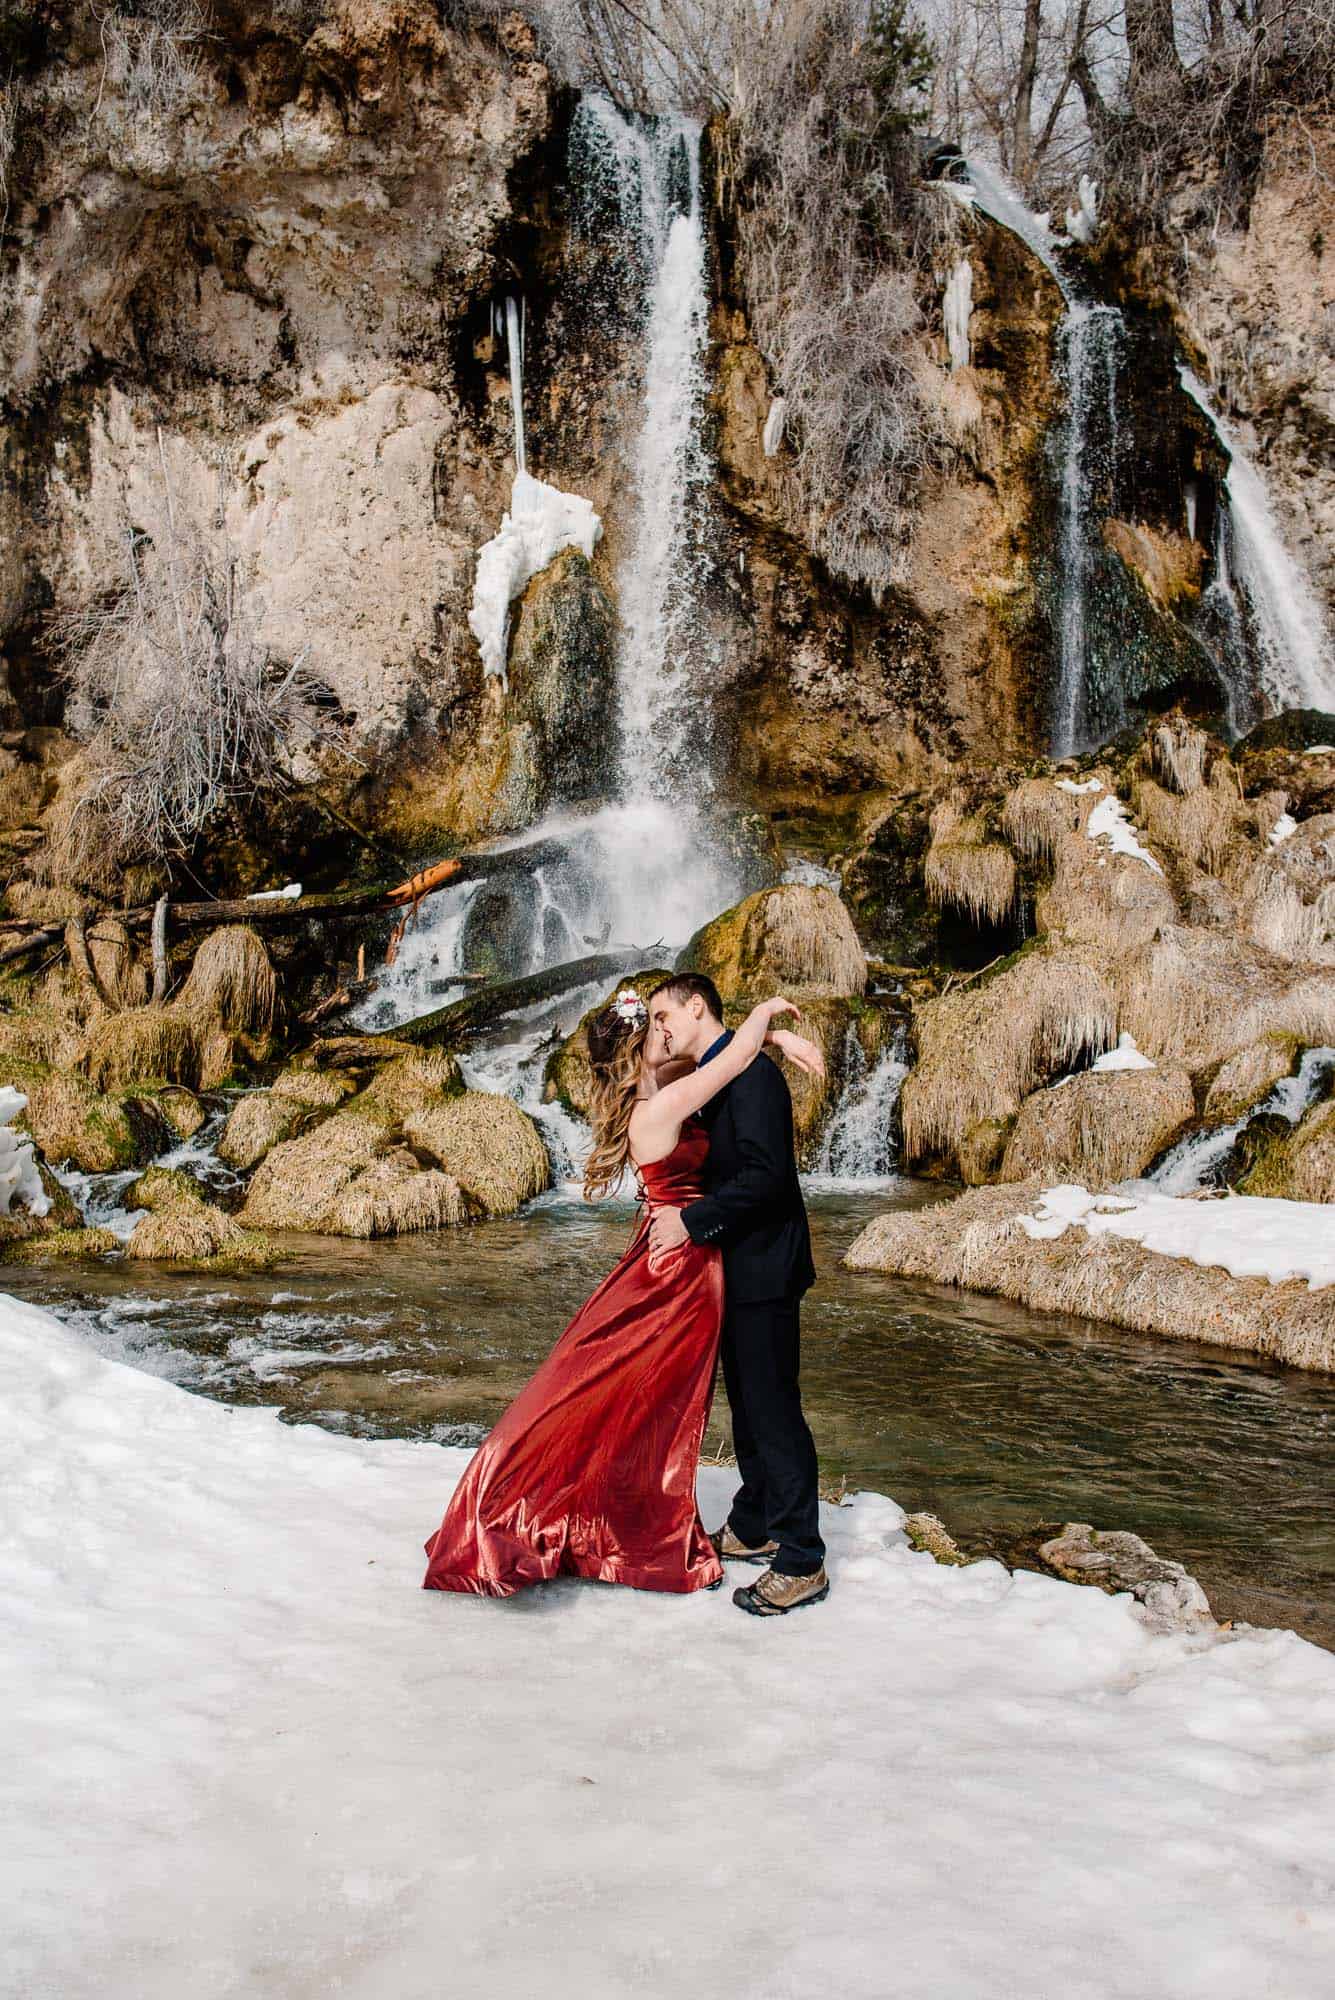 bride and groom kissing in front of an epic waterfall during winter who are eloping during the pandemic